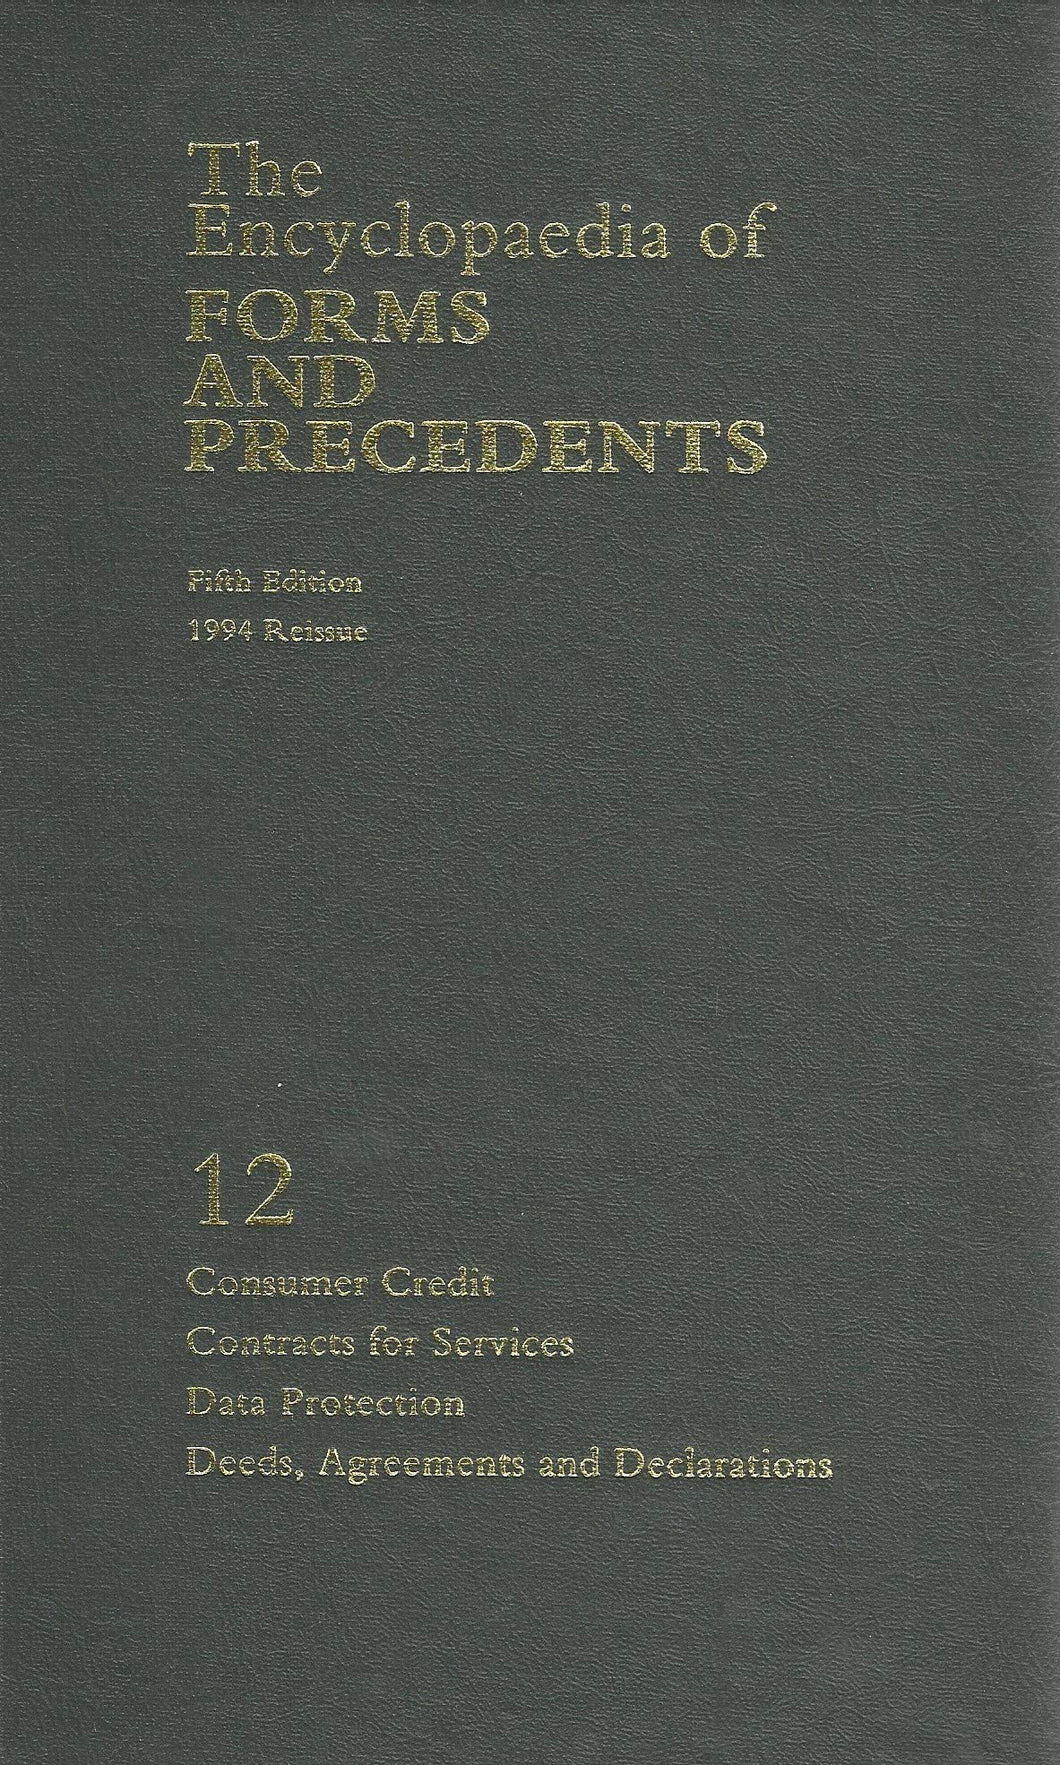 The Encyclopaedia of Forms and Precedents, Fifth Edition 1994 Reissue - Volume 12